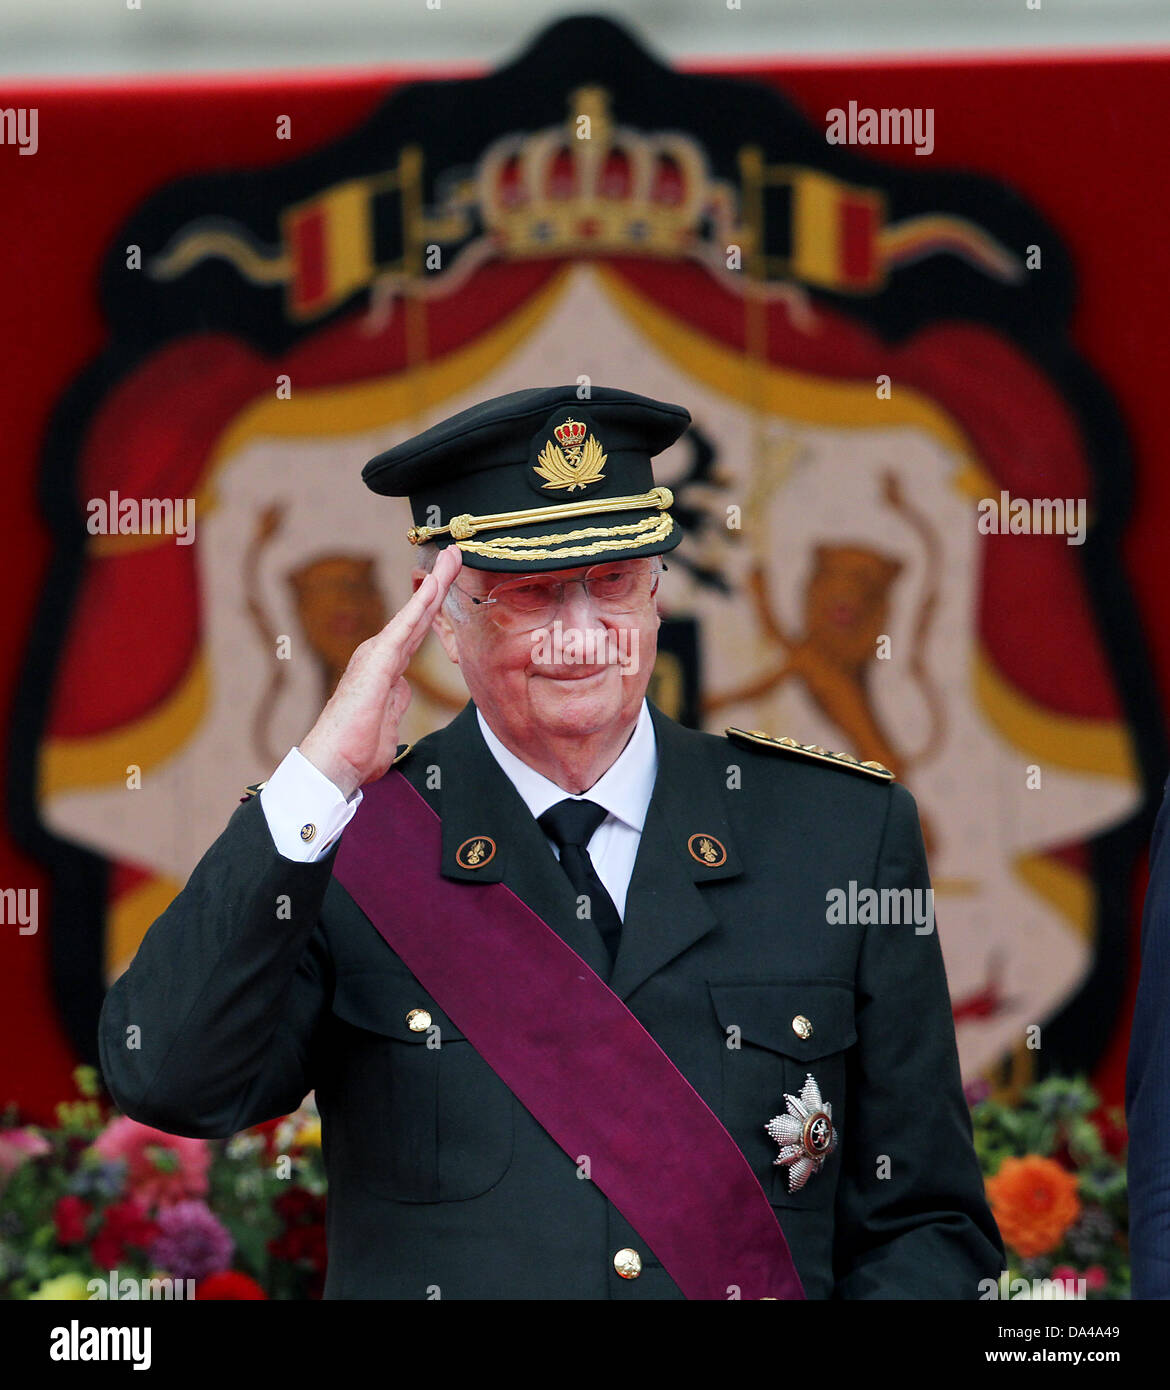 King Albert II of Belgium attends a military parade in front of the Royal Palace on National Day in Brussels, Belgium, 21 July 2011. Photo: Patrick van Katwijk Stock Photo